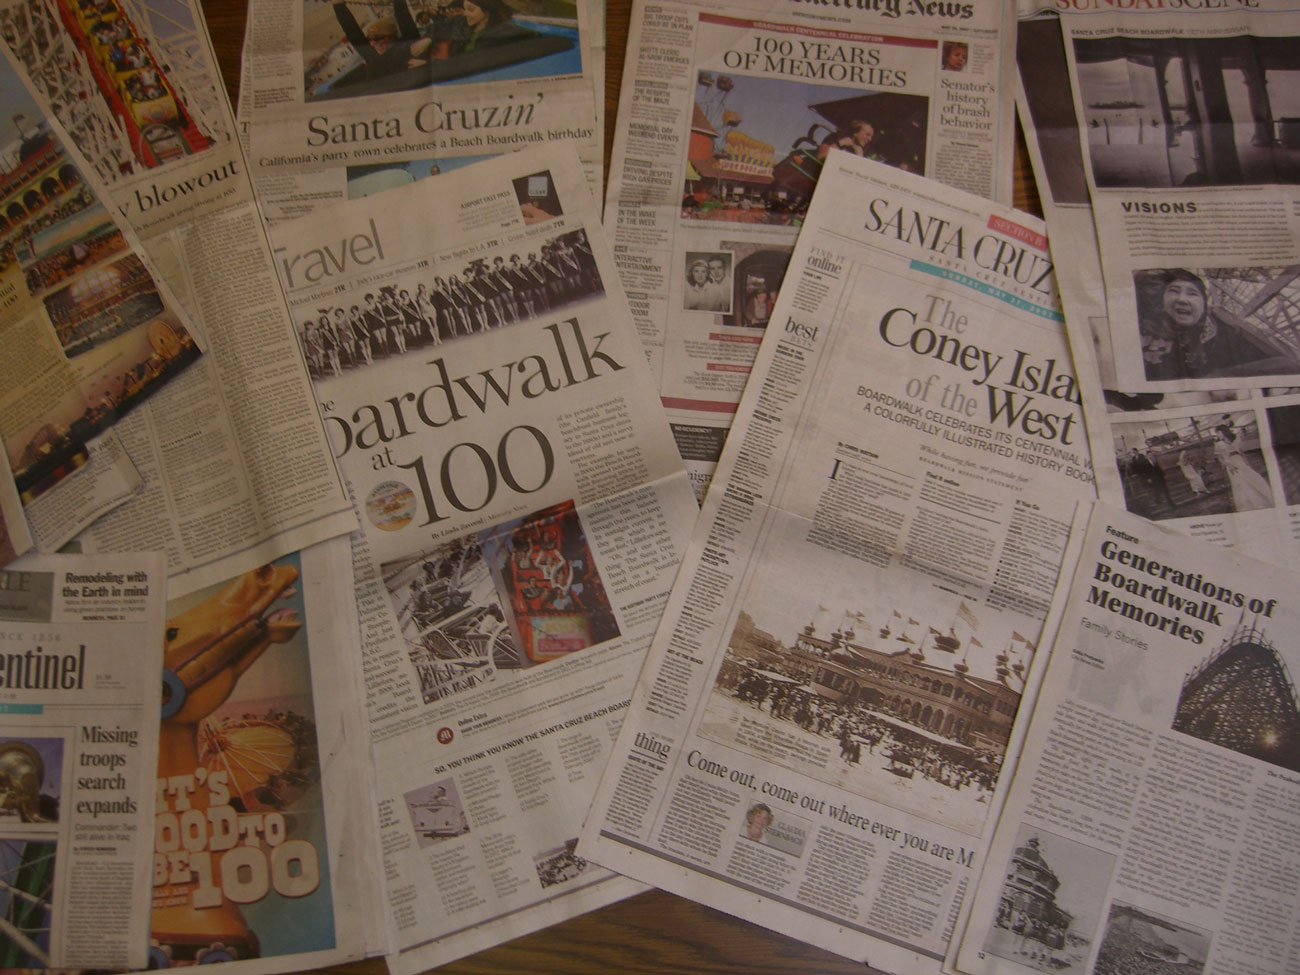 News clippings reporting on the Boardwalk's Centennial Celebration